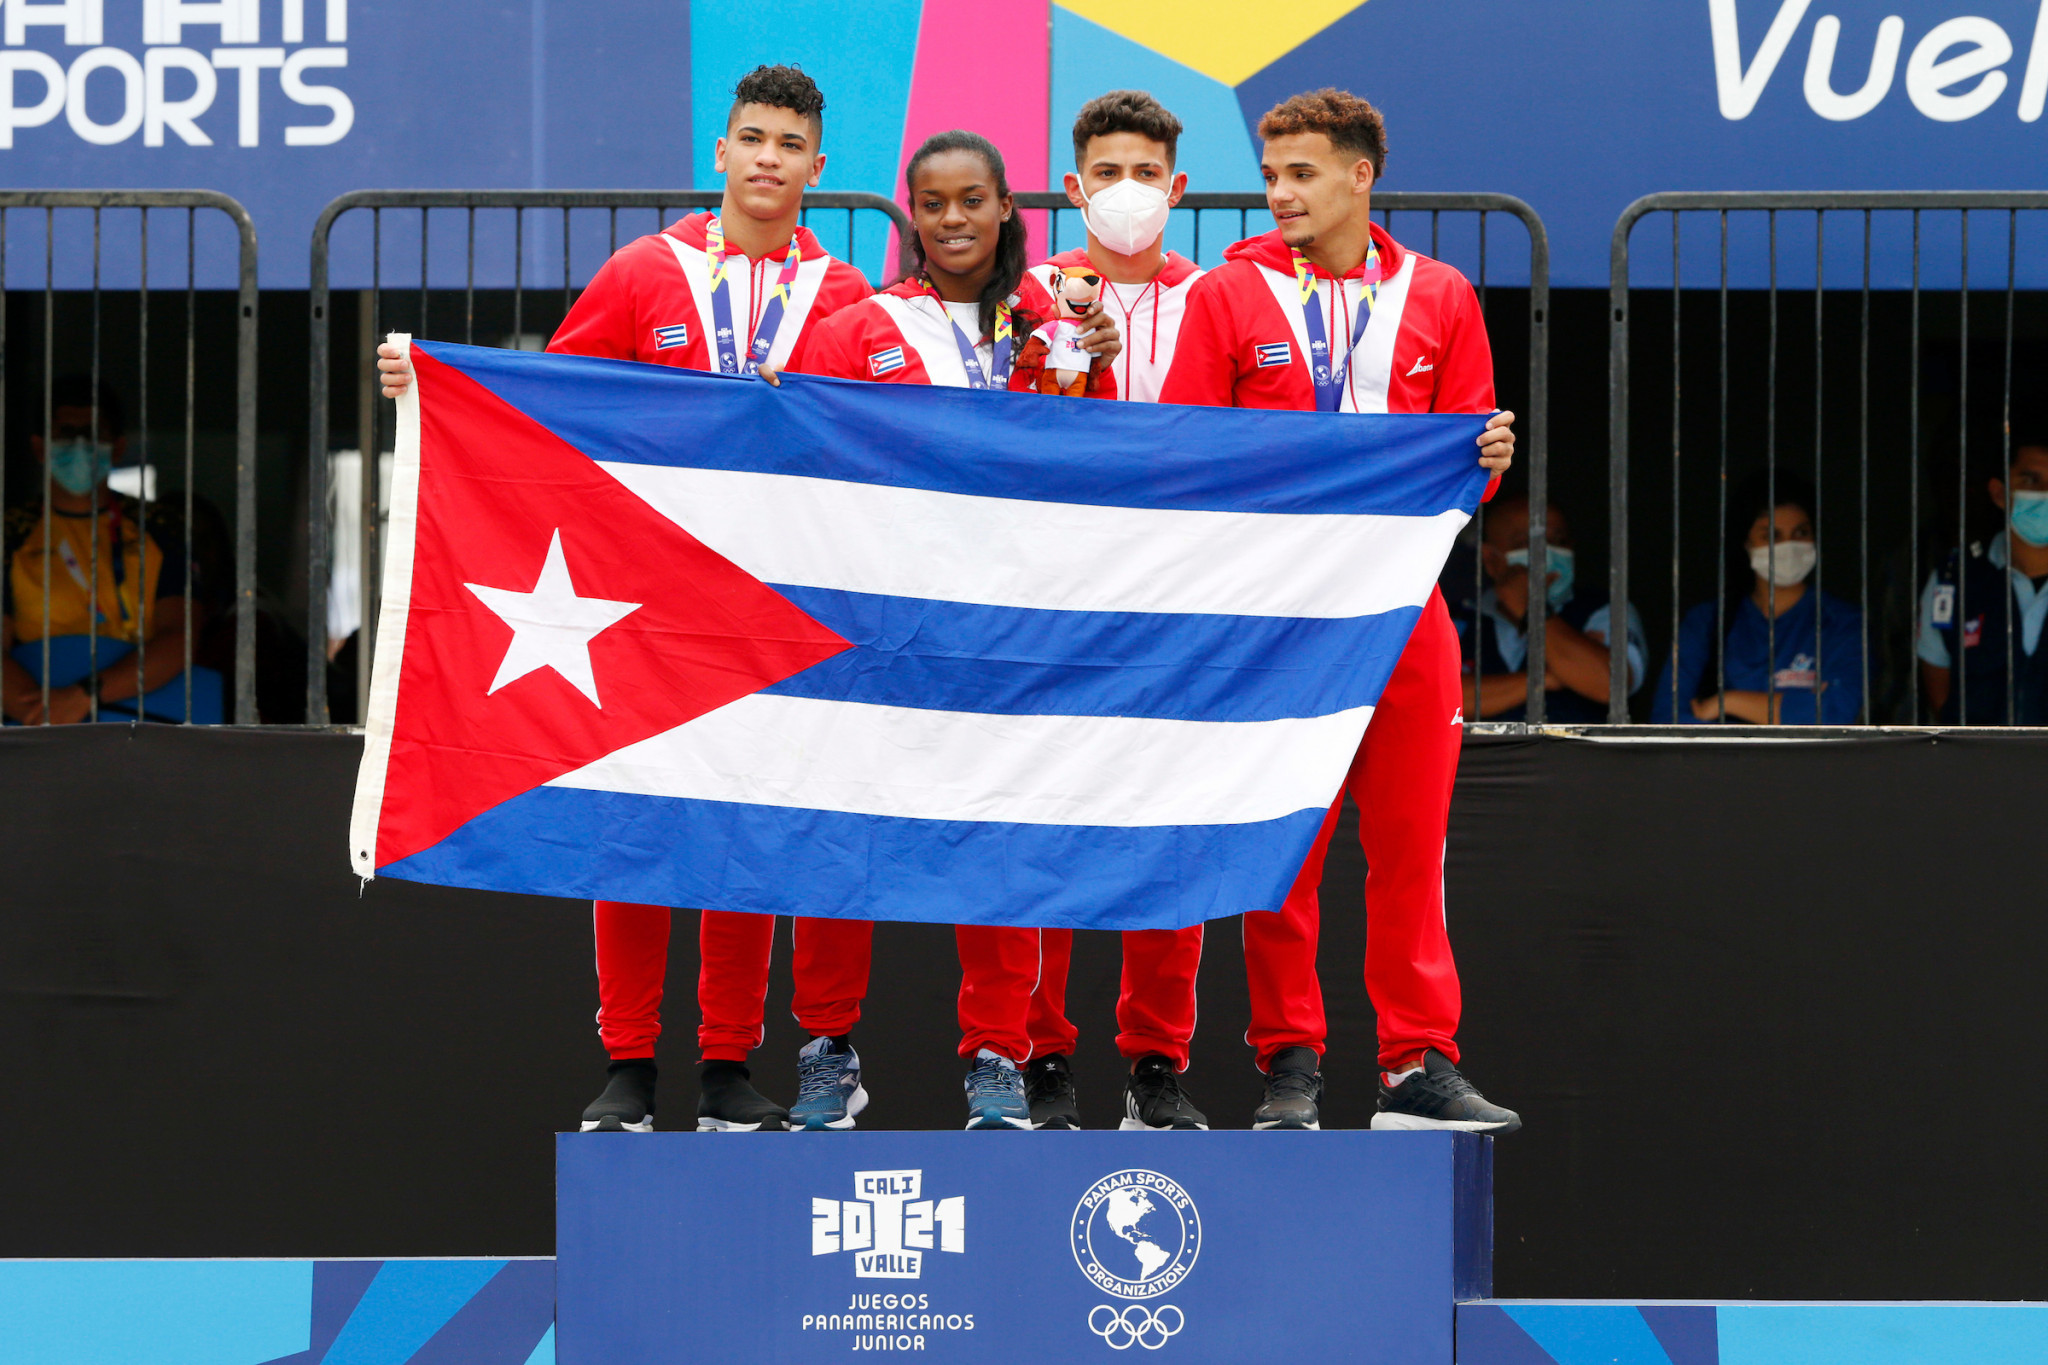 Cuba won the first gold medal of the Junior Pan American Games in the mixed team diving event ©Agencia.XpressMedia Alex Reyes